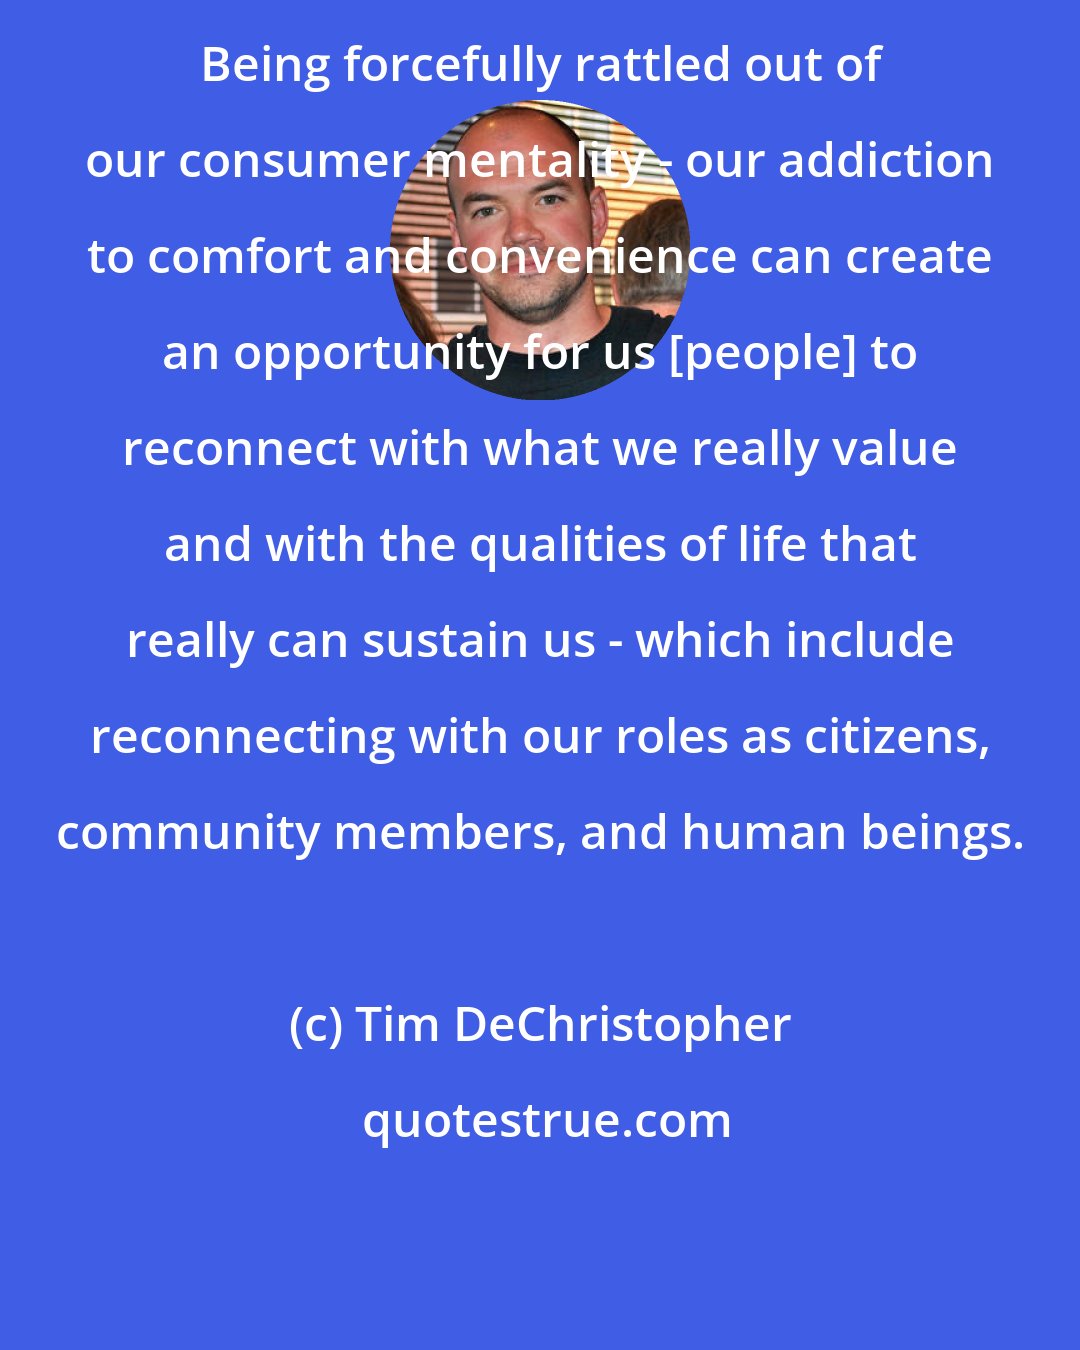 Tim DeChristopher: Being forcefully rattled out of our consumer mentality - our addiction to comfort and convenience can create an opportunity for us [people] to reconnect with what we really value and with the qualities of life that really can sustain us - which include reconnecting with our roles as citizens, community members, and human beings.